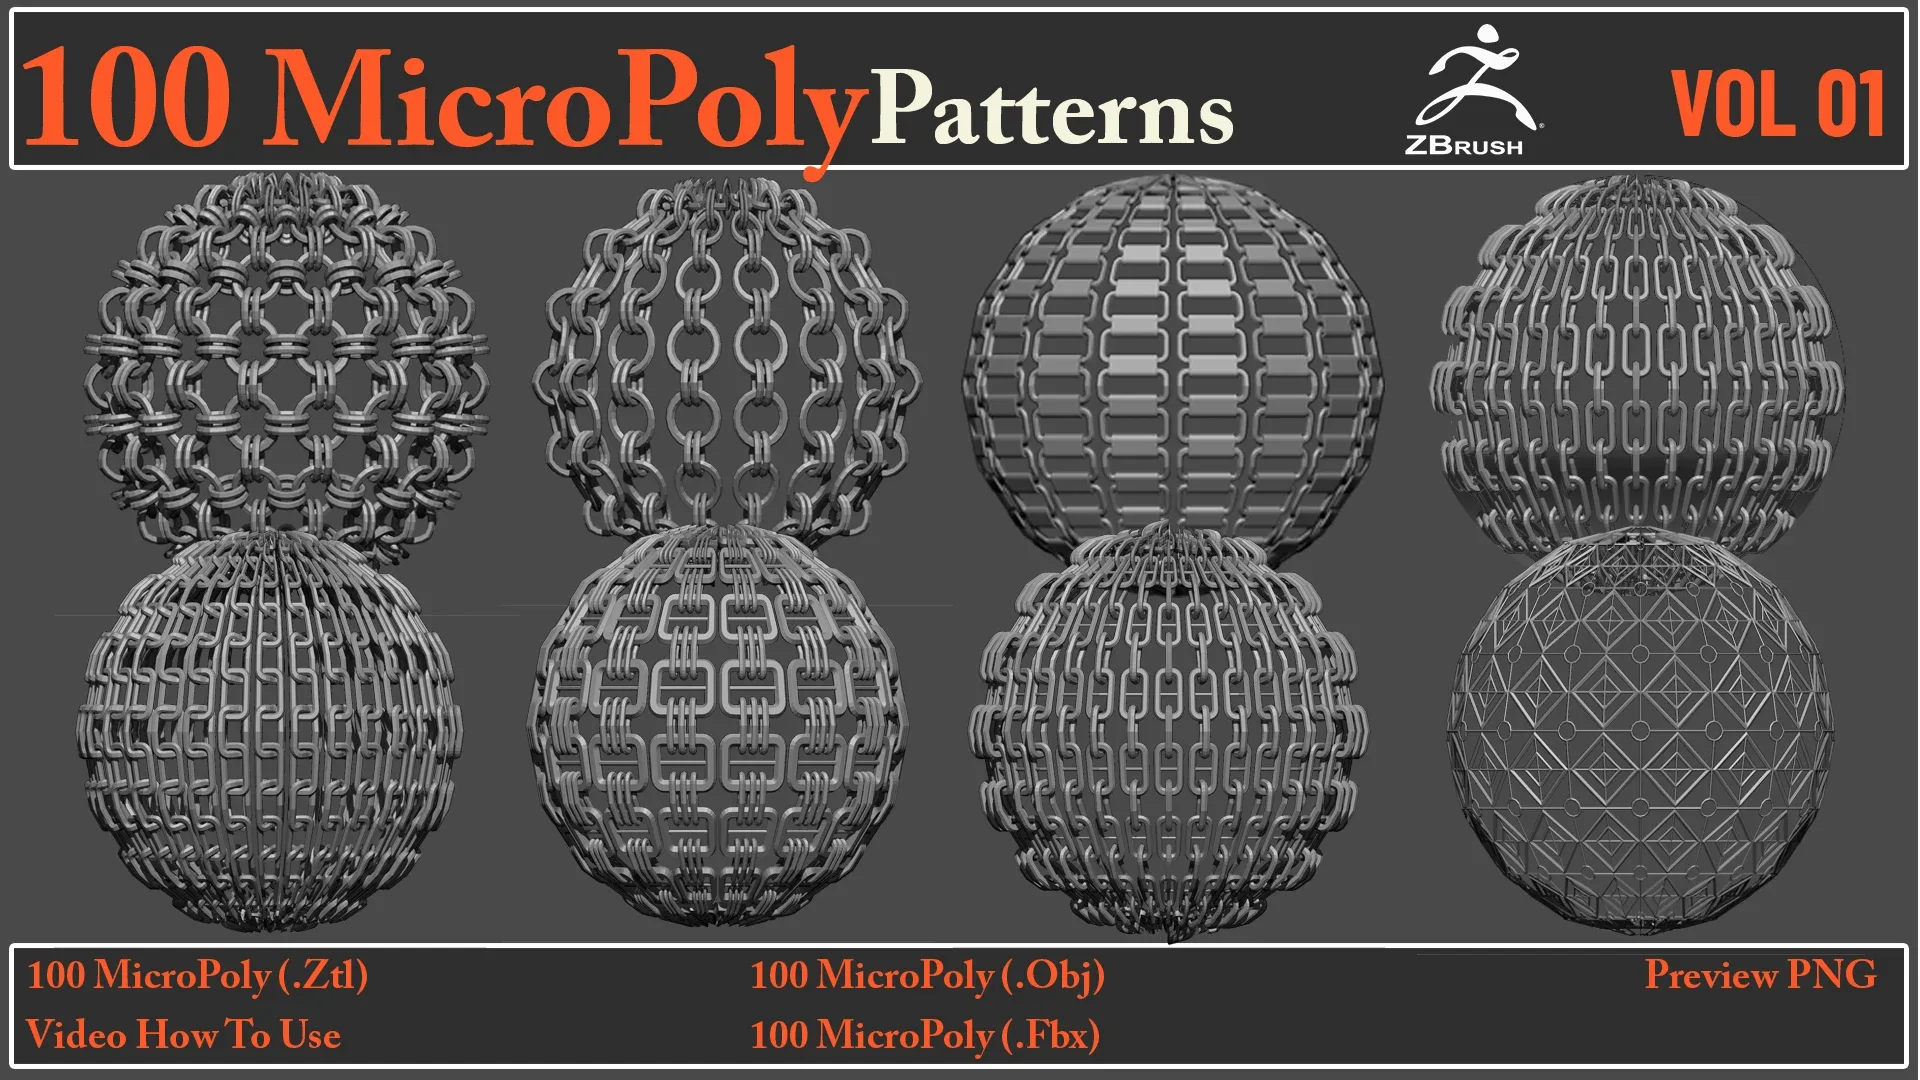 100 MicroPoly Patterns + Video How To Use + 100 Fbx & Obj